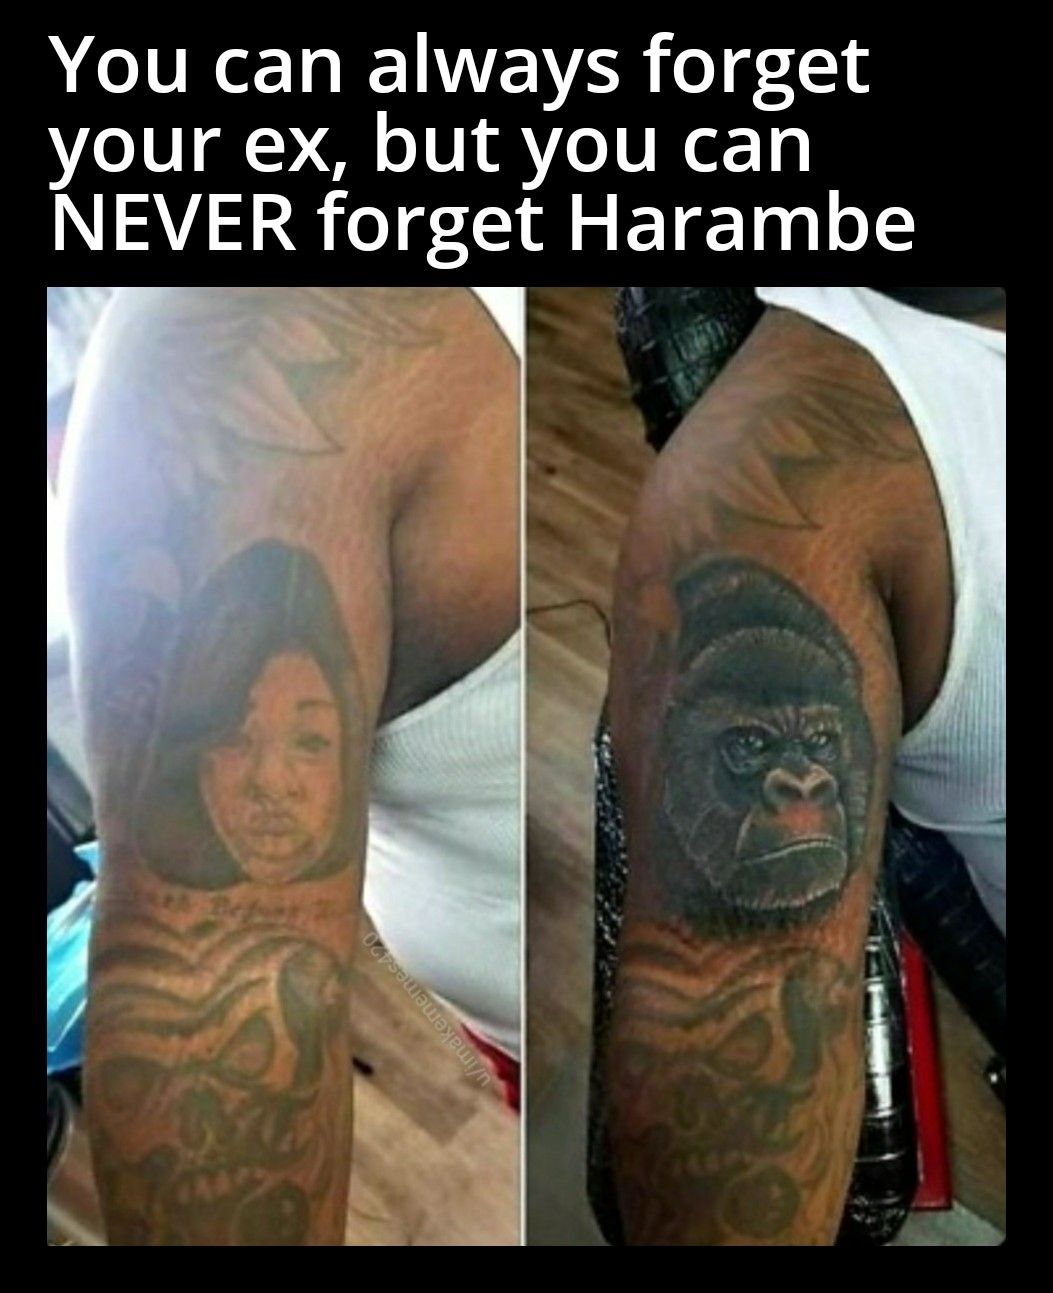 It's already been 5 years... we miss you Harambe